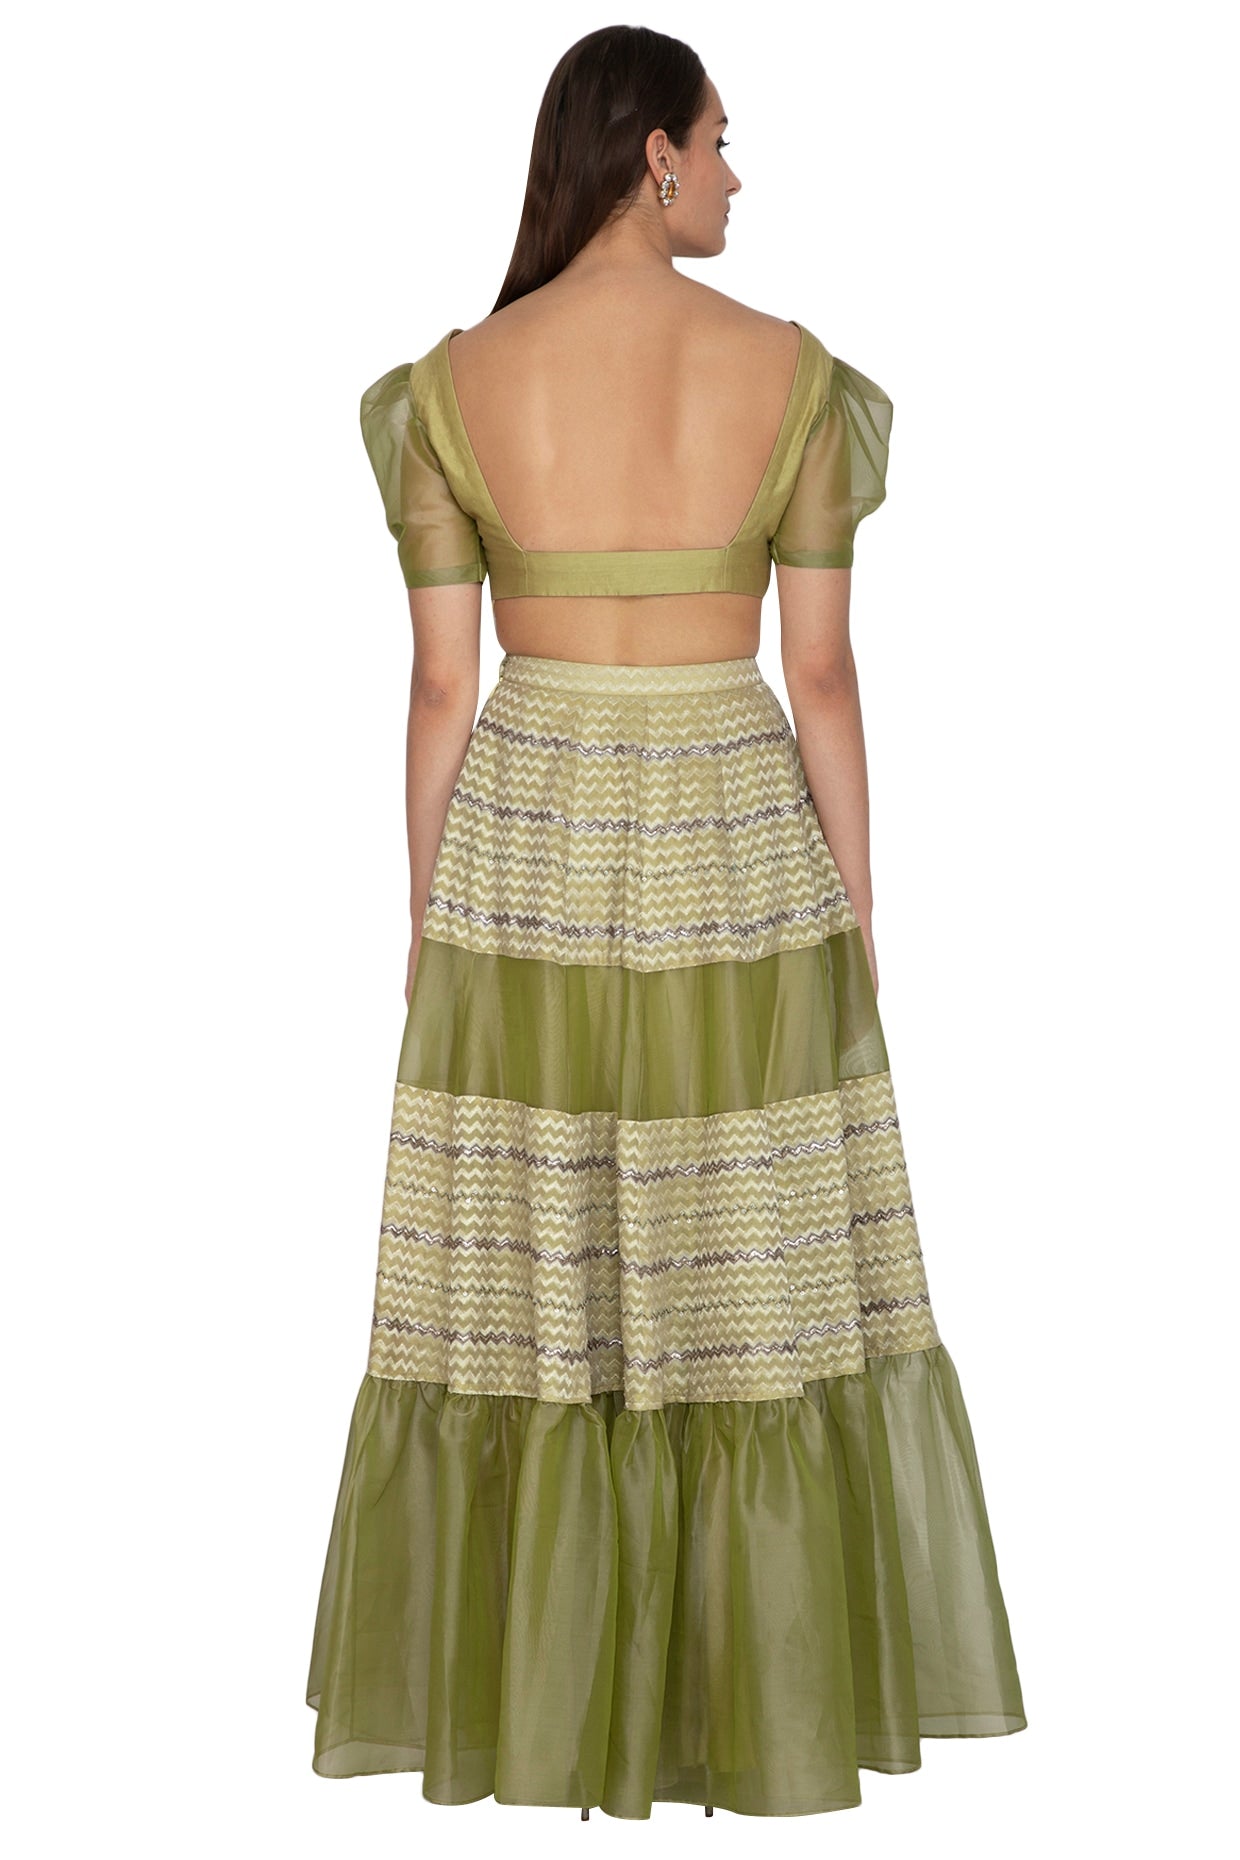 Olive Green Embroidered Blouse With Lehenga Skirt